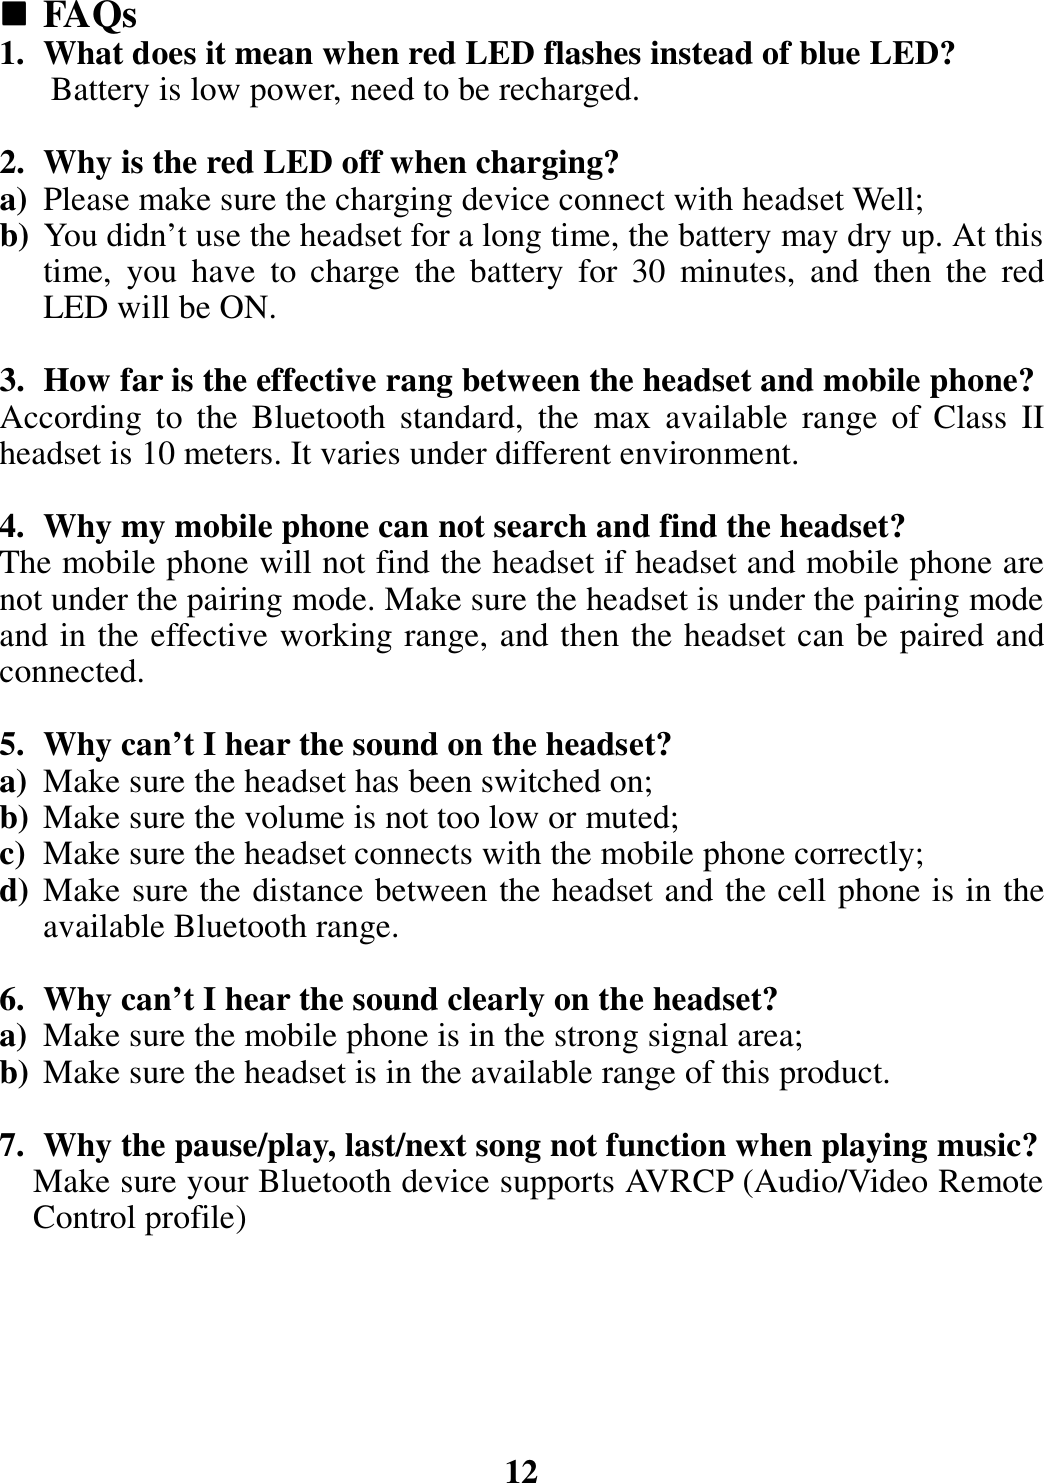  FAQs 1. What does it mean when red LED flashes instead of blue LED? Battery is low power, need to be recharged.  2. Why is the red LED off when charging? a) Please make sure the charging device connect with headset Well; b) You didn’t use the headset for a long time, the battery may dry up. At this time,  you  have  to  charge  the  battery  for  30  minutes,  and  then  the  red LED will be ON.  3. How far is the effective rang between the headset and mobile phone? According  to  the  Bluetooth  standard,  the  max  available  range  of  Class  II headset is 10 meters. It varies under different environment.  4. Why my mobile phone can not search and find the headset? The mobile phone will not find the headset if headset and mobile phone are not under the pairing mode. Make sure the headset is under the pairing mode and in the effective working range, and then the headset can be paired and connected.  5. Why can’t I hear the sound on the headset? a) Make sure the headset has been switched on; b) Make sure the volume is not too low or muted; c) Make sure the headset connects with the mobile phone correctly; d) Make sure the distance between the headset and the cell phone is in the available Bluetooth range.  6. Why can’t I hear the sound clearly on the headset? a) Make sure the mobile phone is in the strong signal area; b) Make sure the headset is in the available range of this product.  7. Why the pause/play, last/next song not function when playing music? Make sure your Bluetooth device supports AVRCP (Audio/Video Remote Control profile)       12 